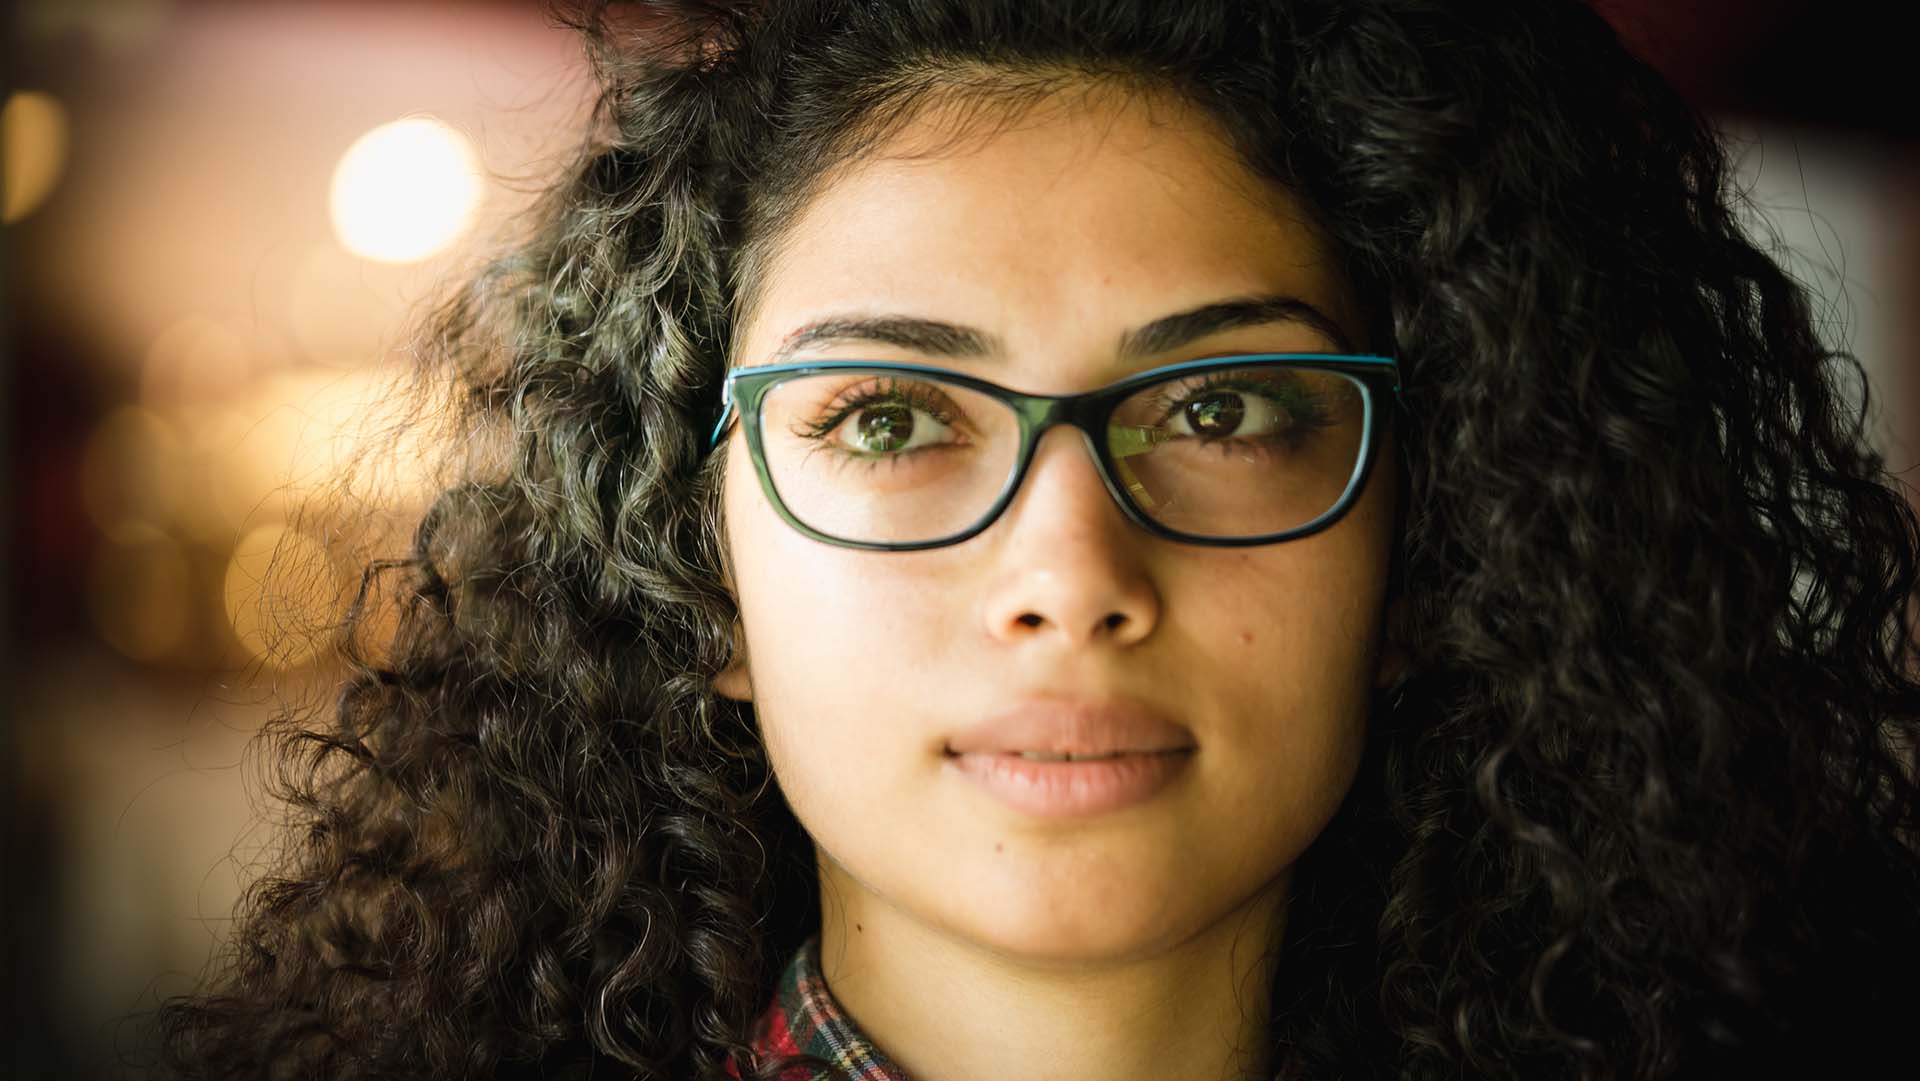 Young woman with curly hair and wearing glasses, looking away from camera.